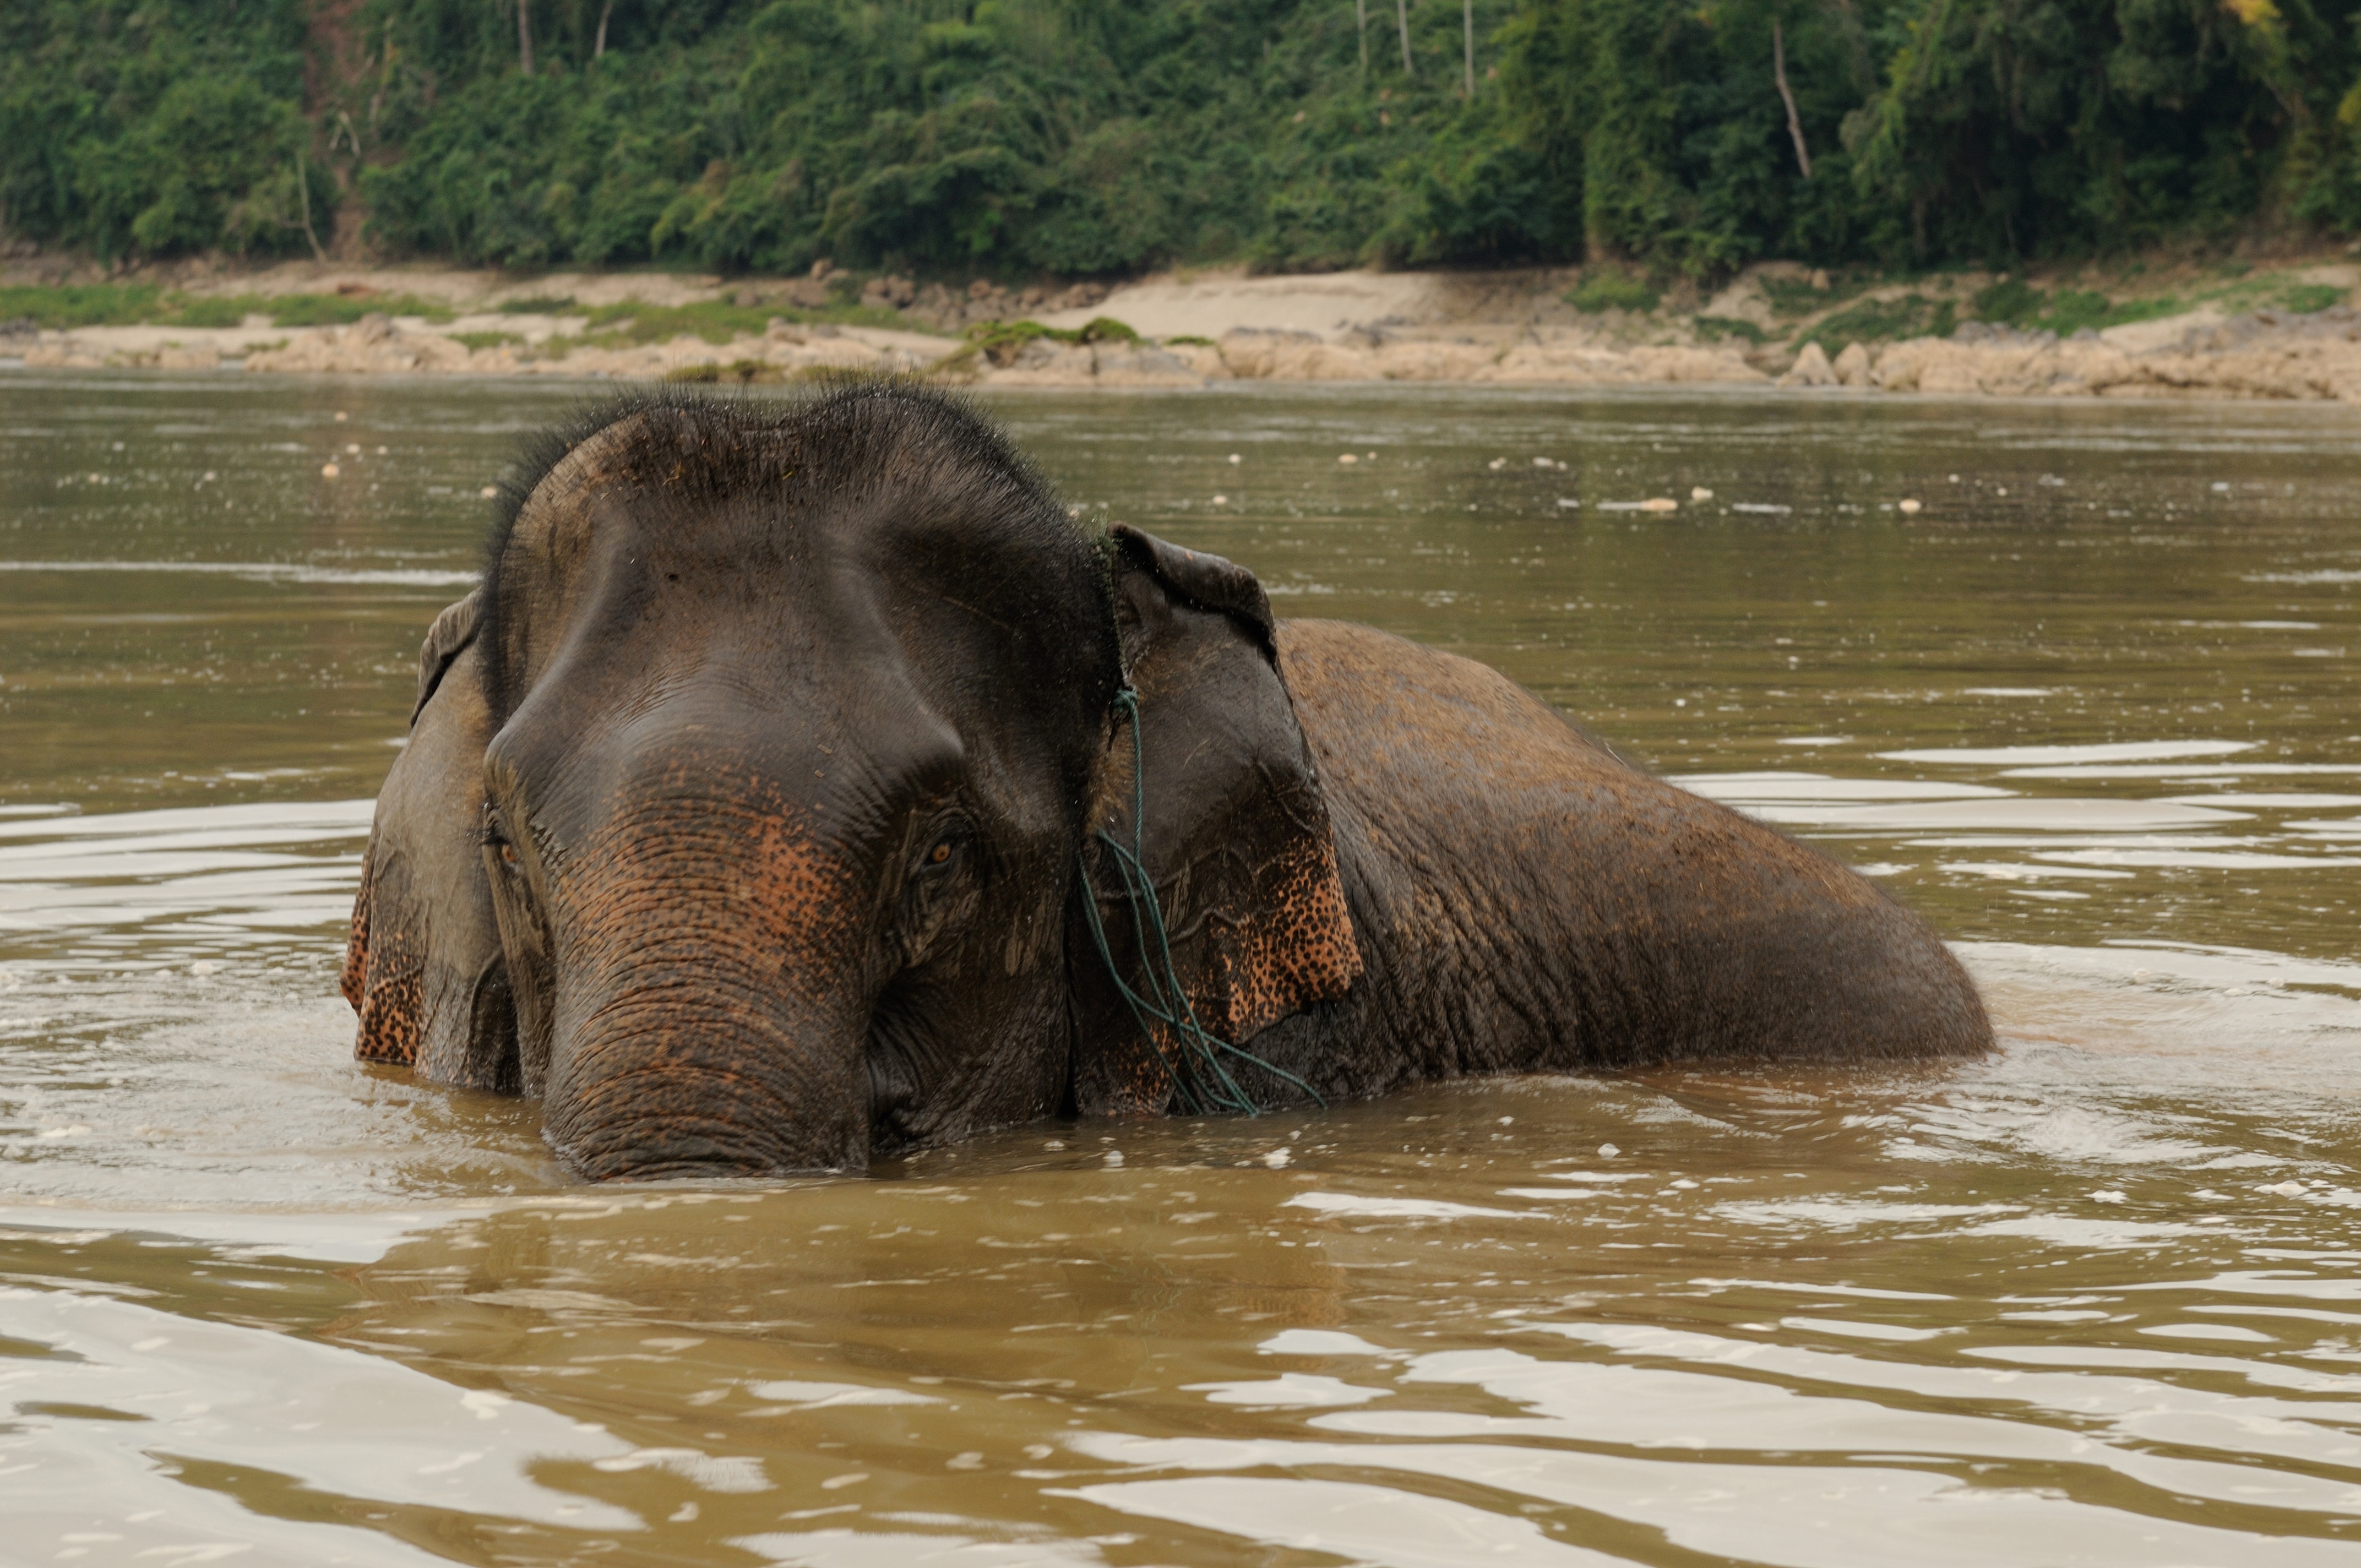 North-Laos: Elephant takes a bath at the Mekong river opposit of Pak Ou caves.